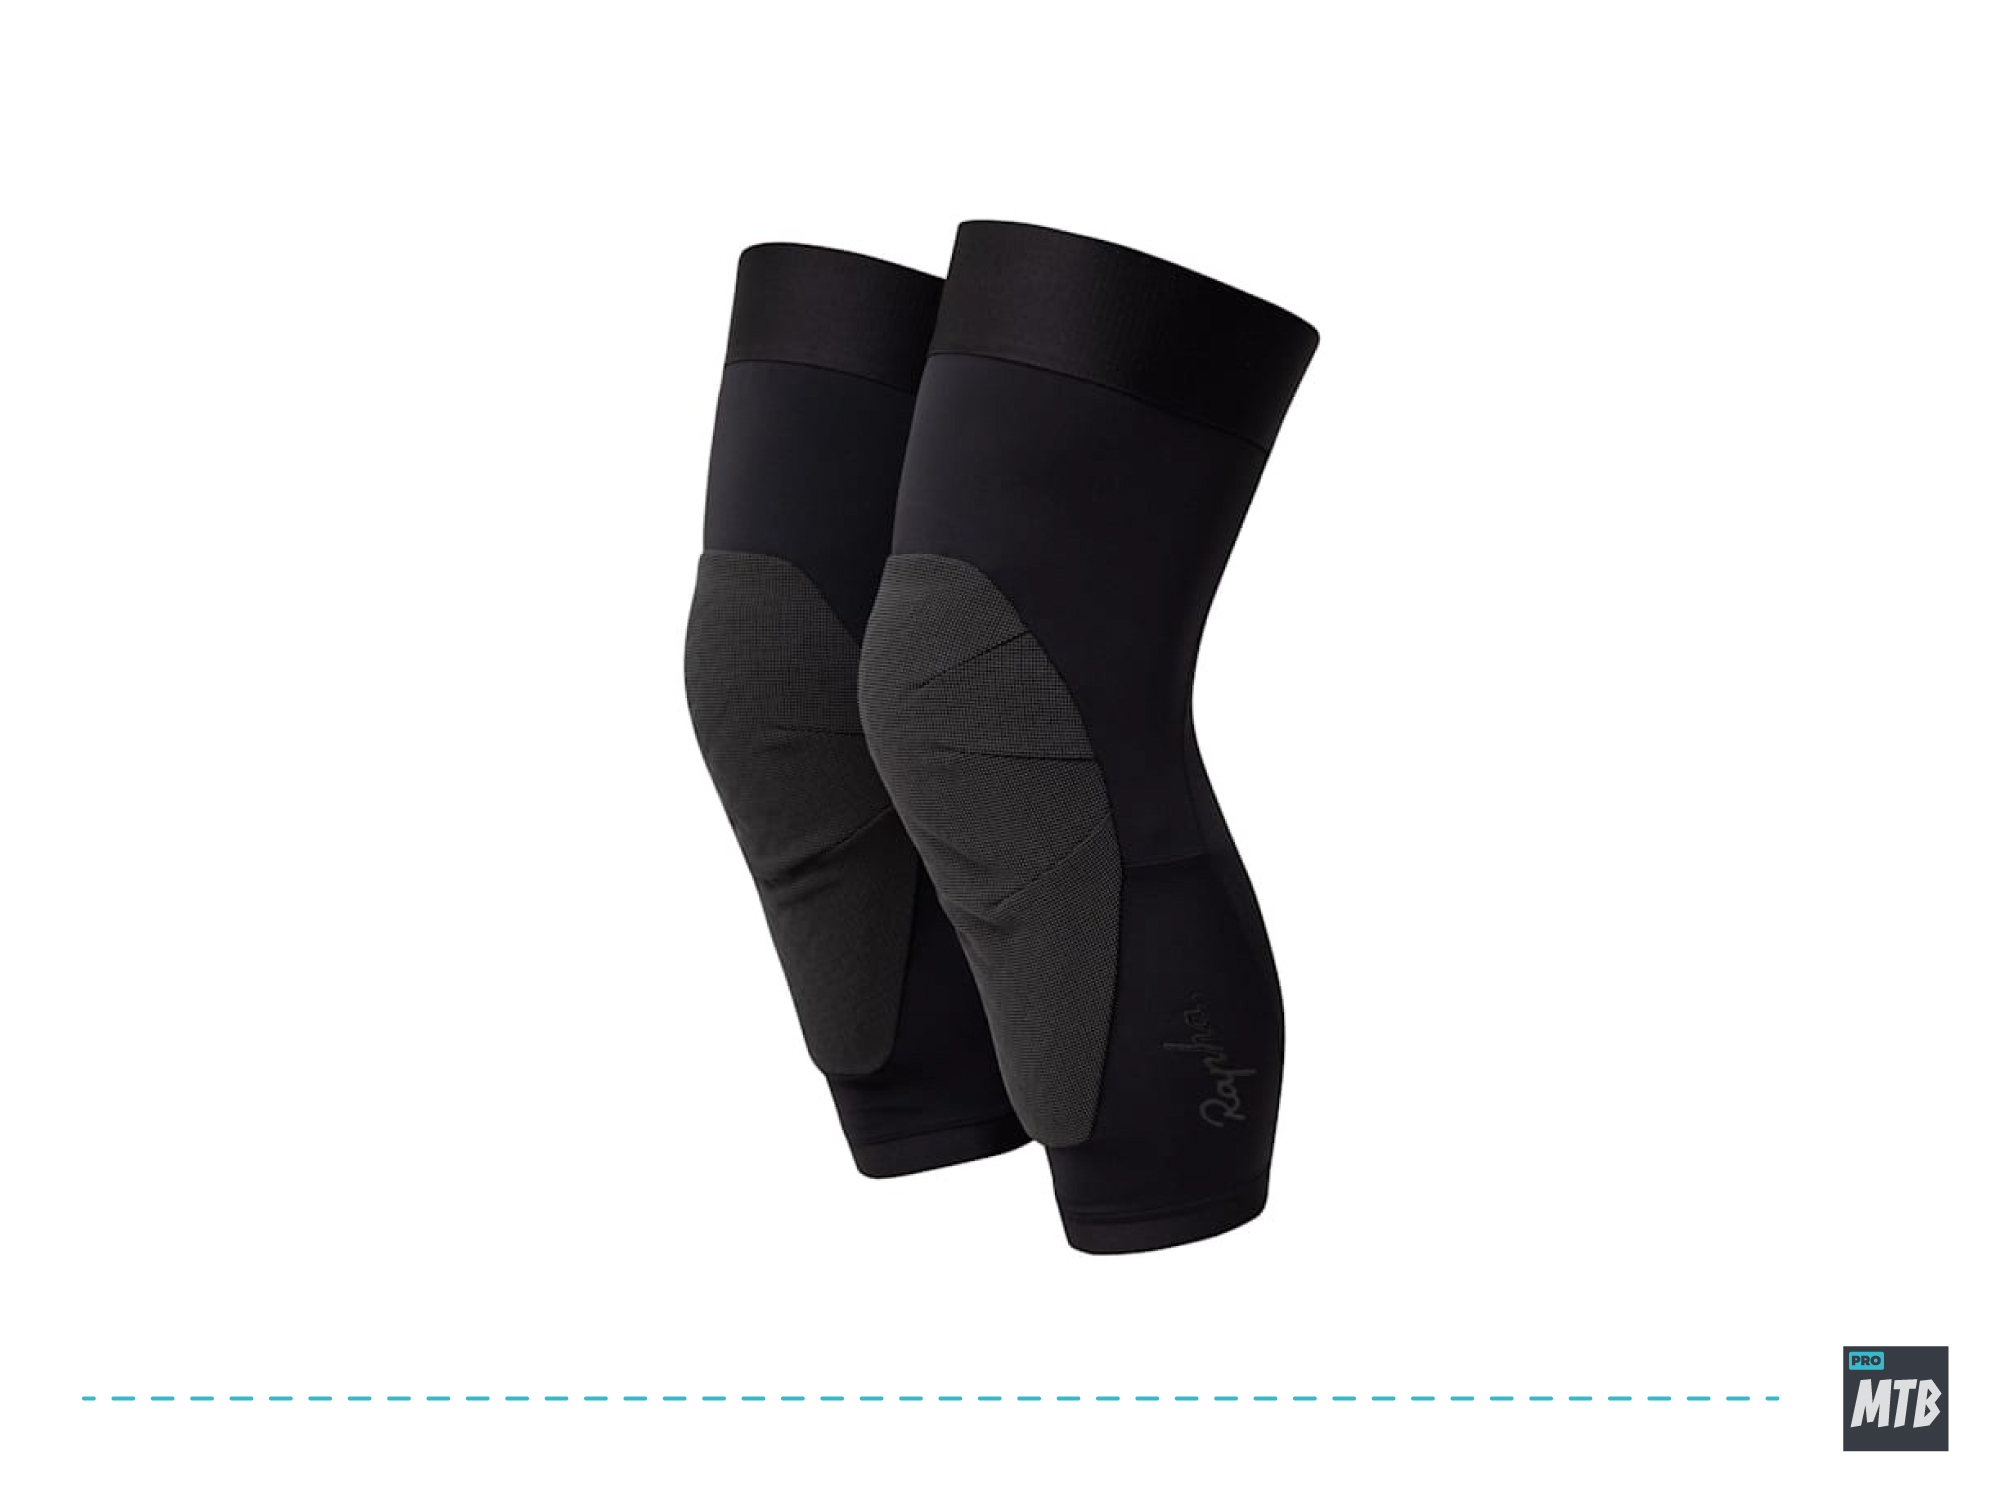 An image of Rapha Trail Knee Pads, which are considered the best mountain bike knee pads for trail riding.